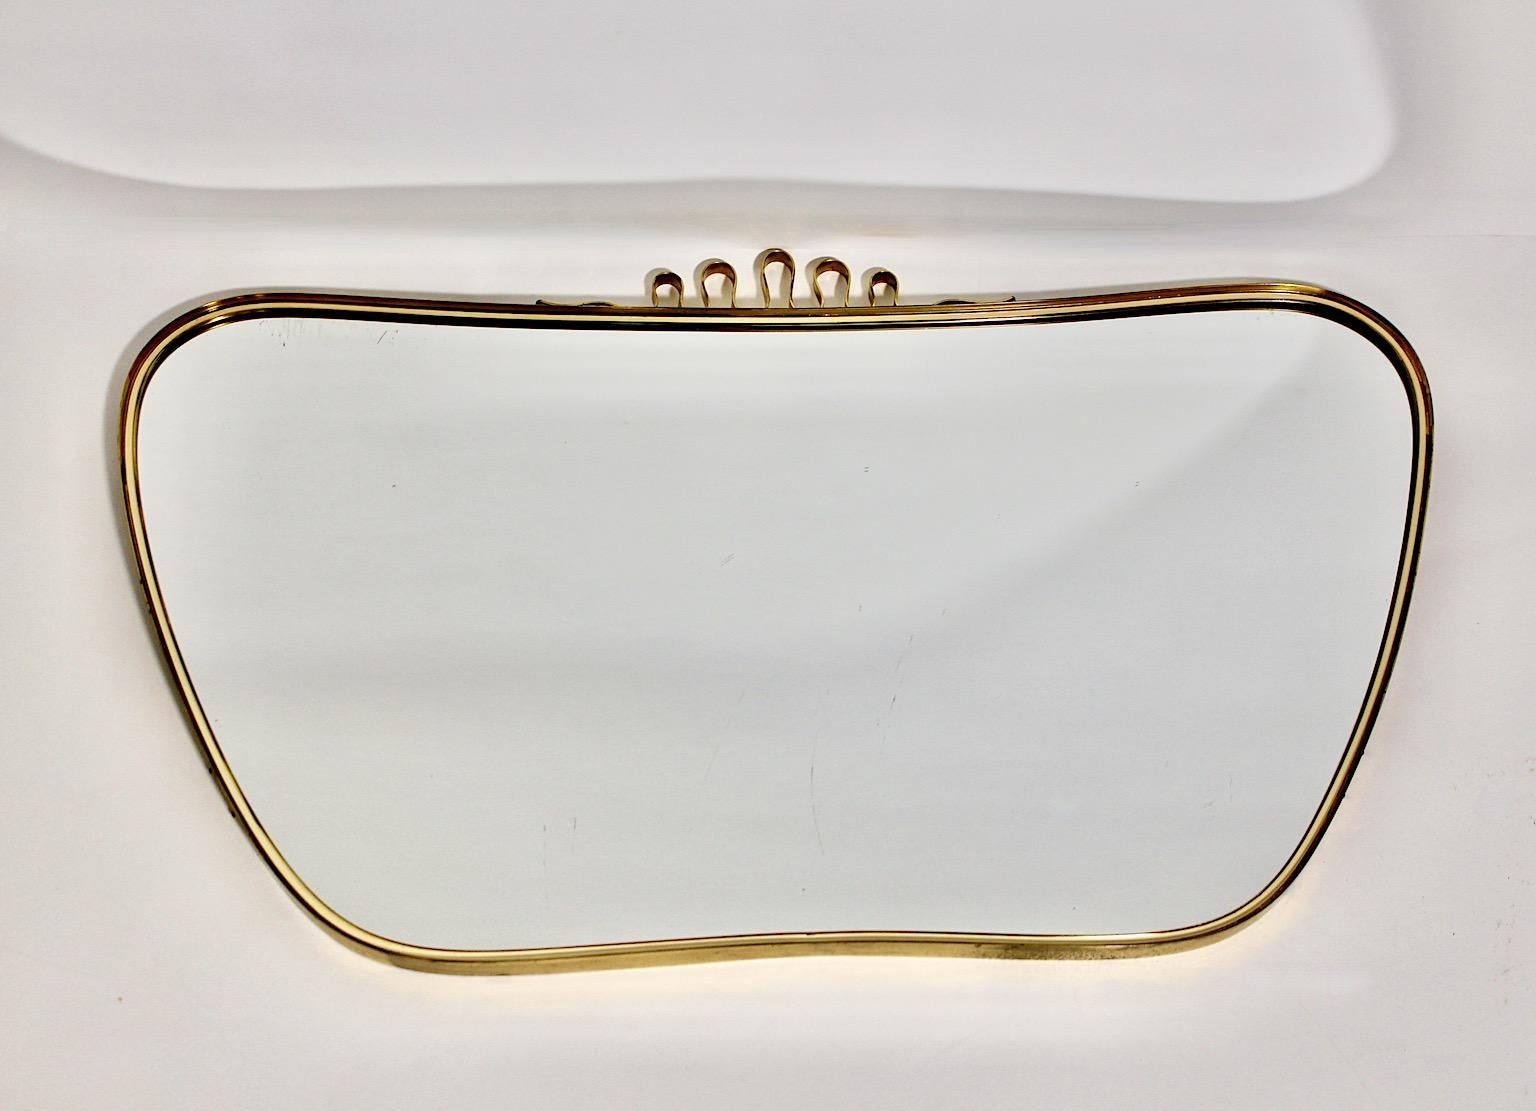 Brass Mid-Century Modern Vintage Oval Wall Mirror Attributed Gio Ponti, 1950s, Italy For Sale